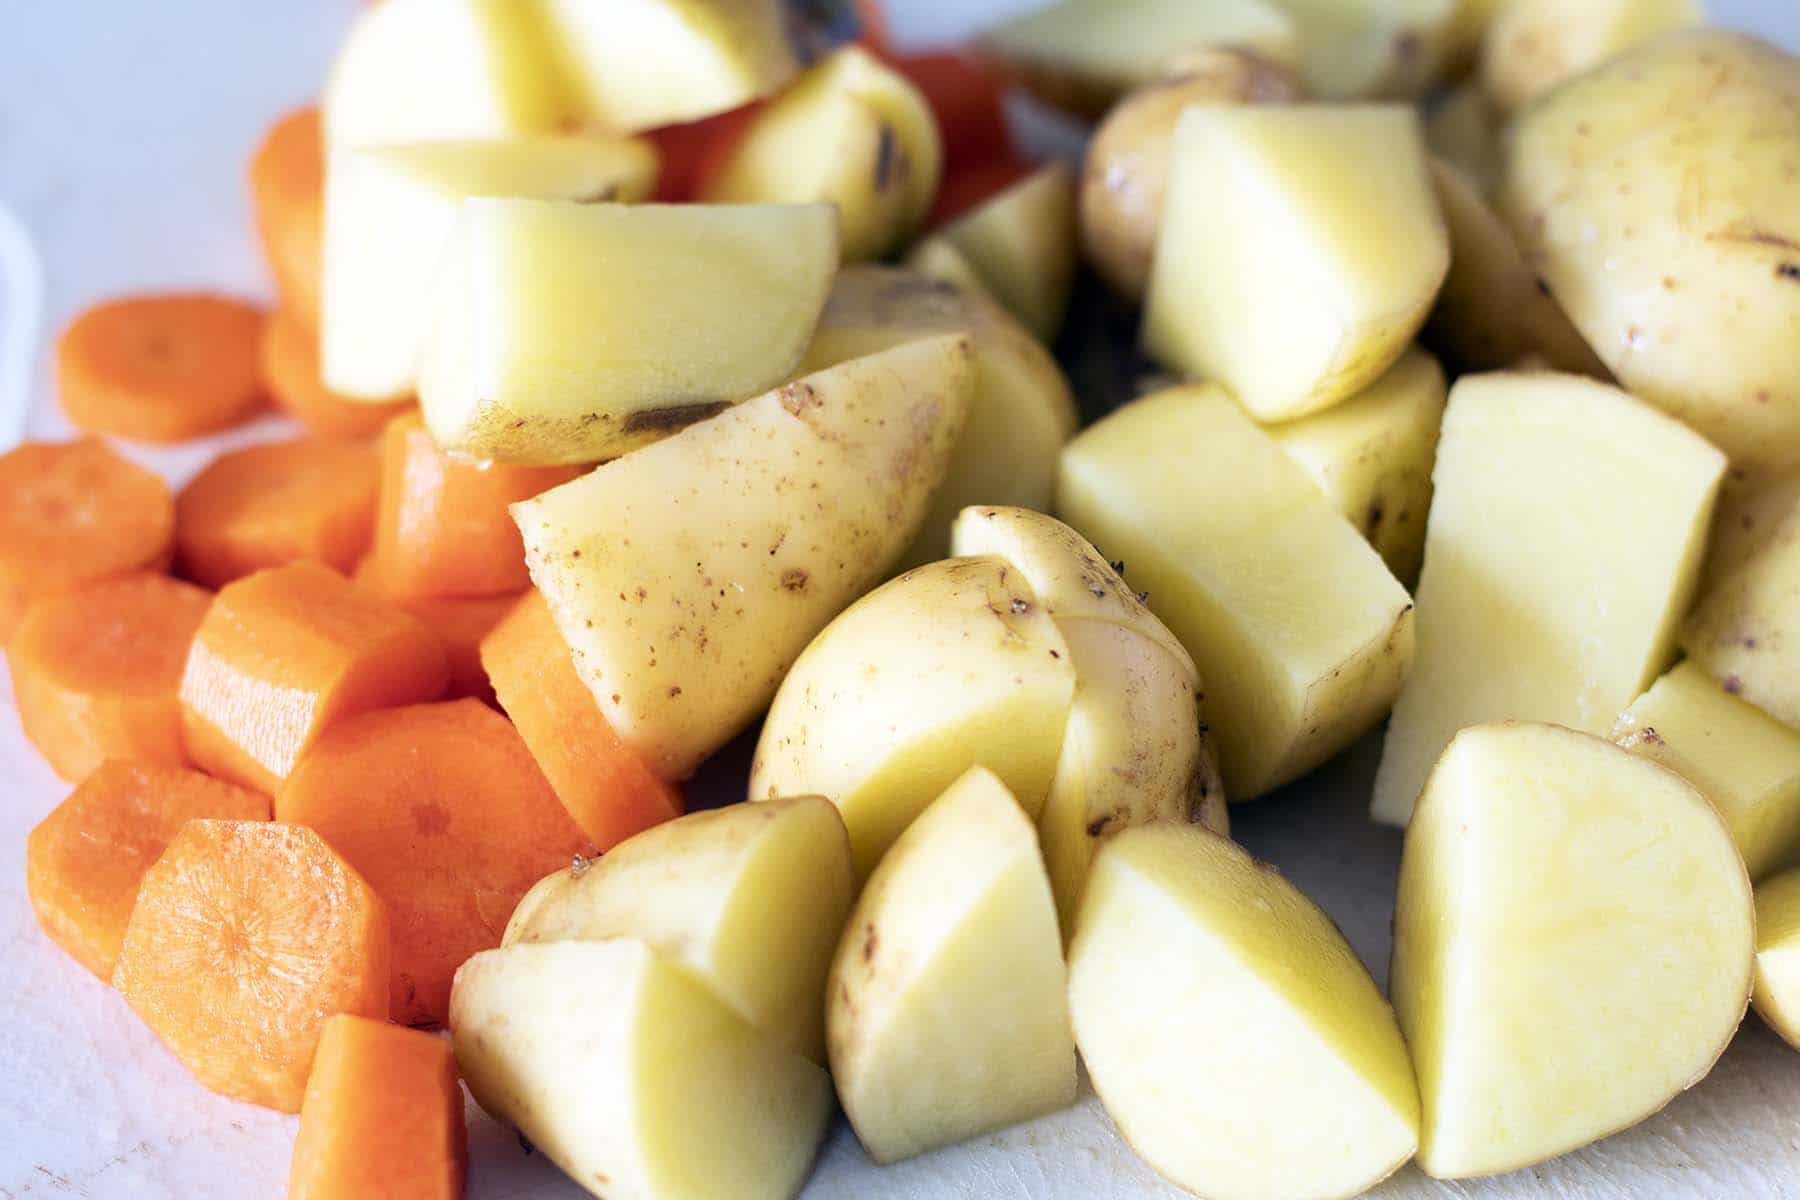 chopped potatoes and carrots